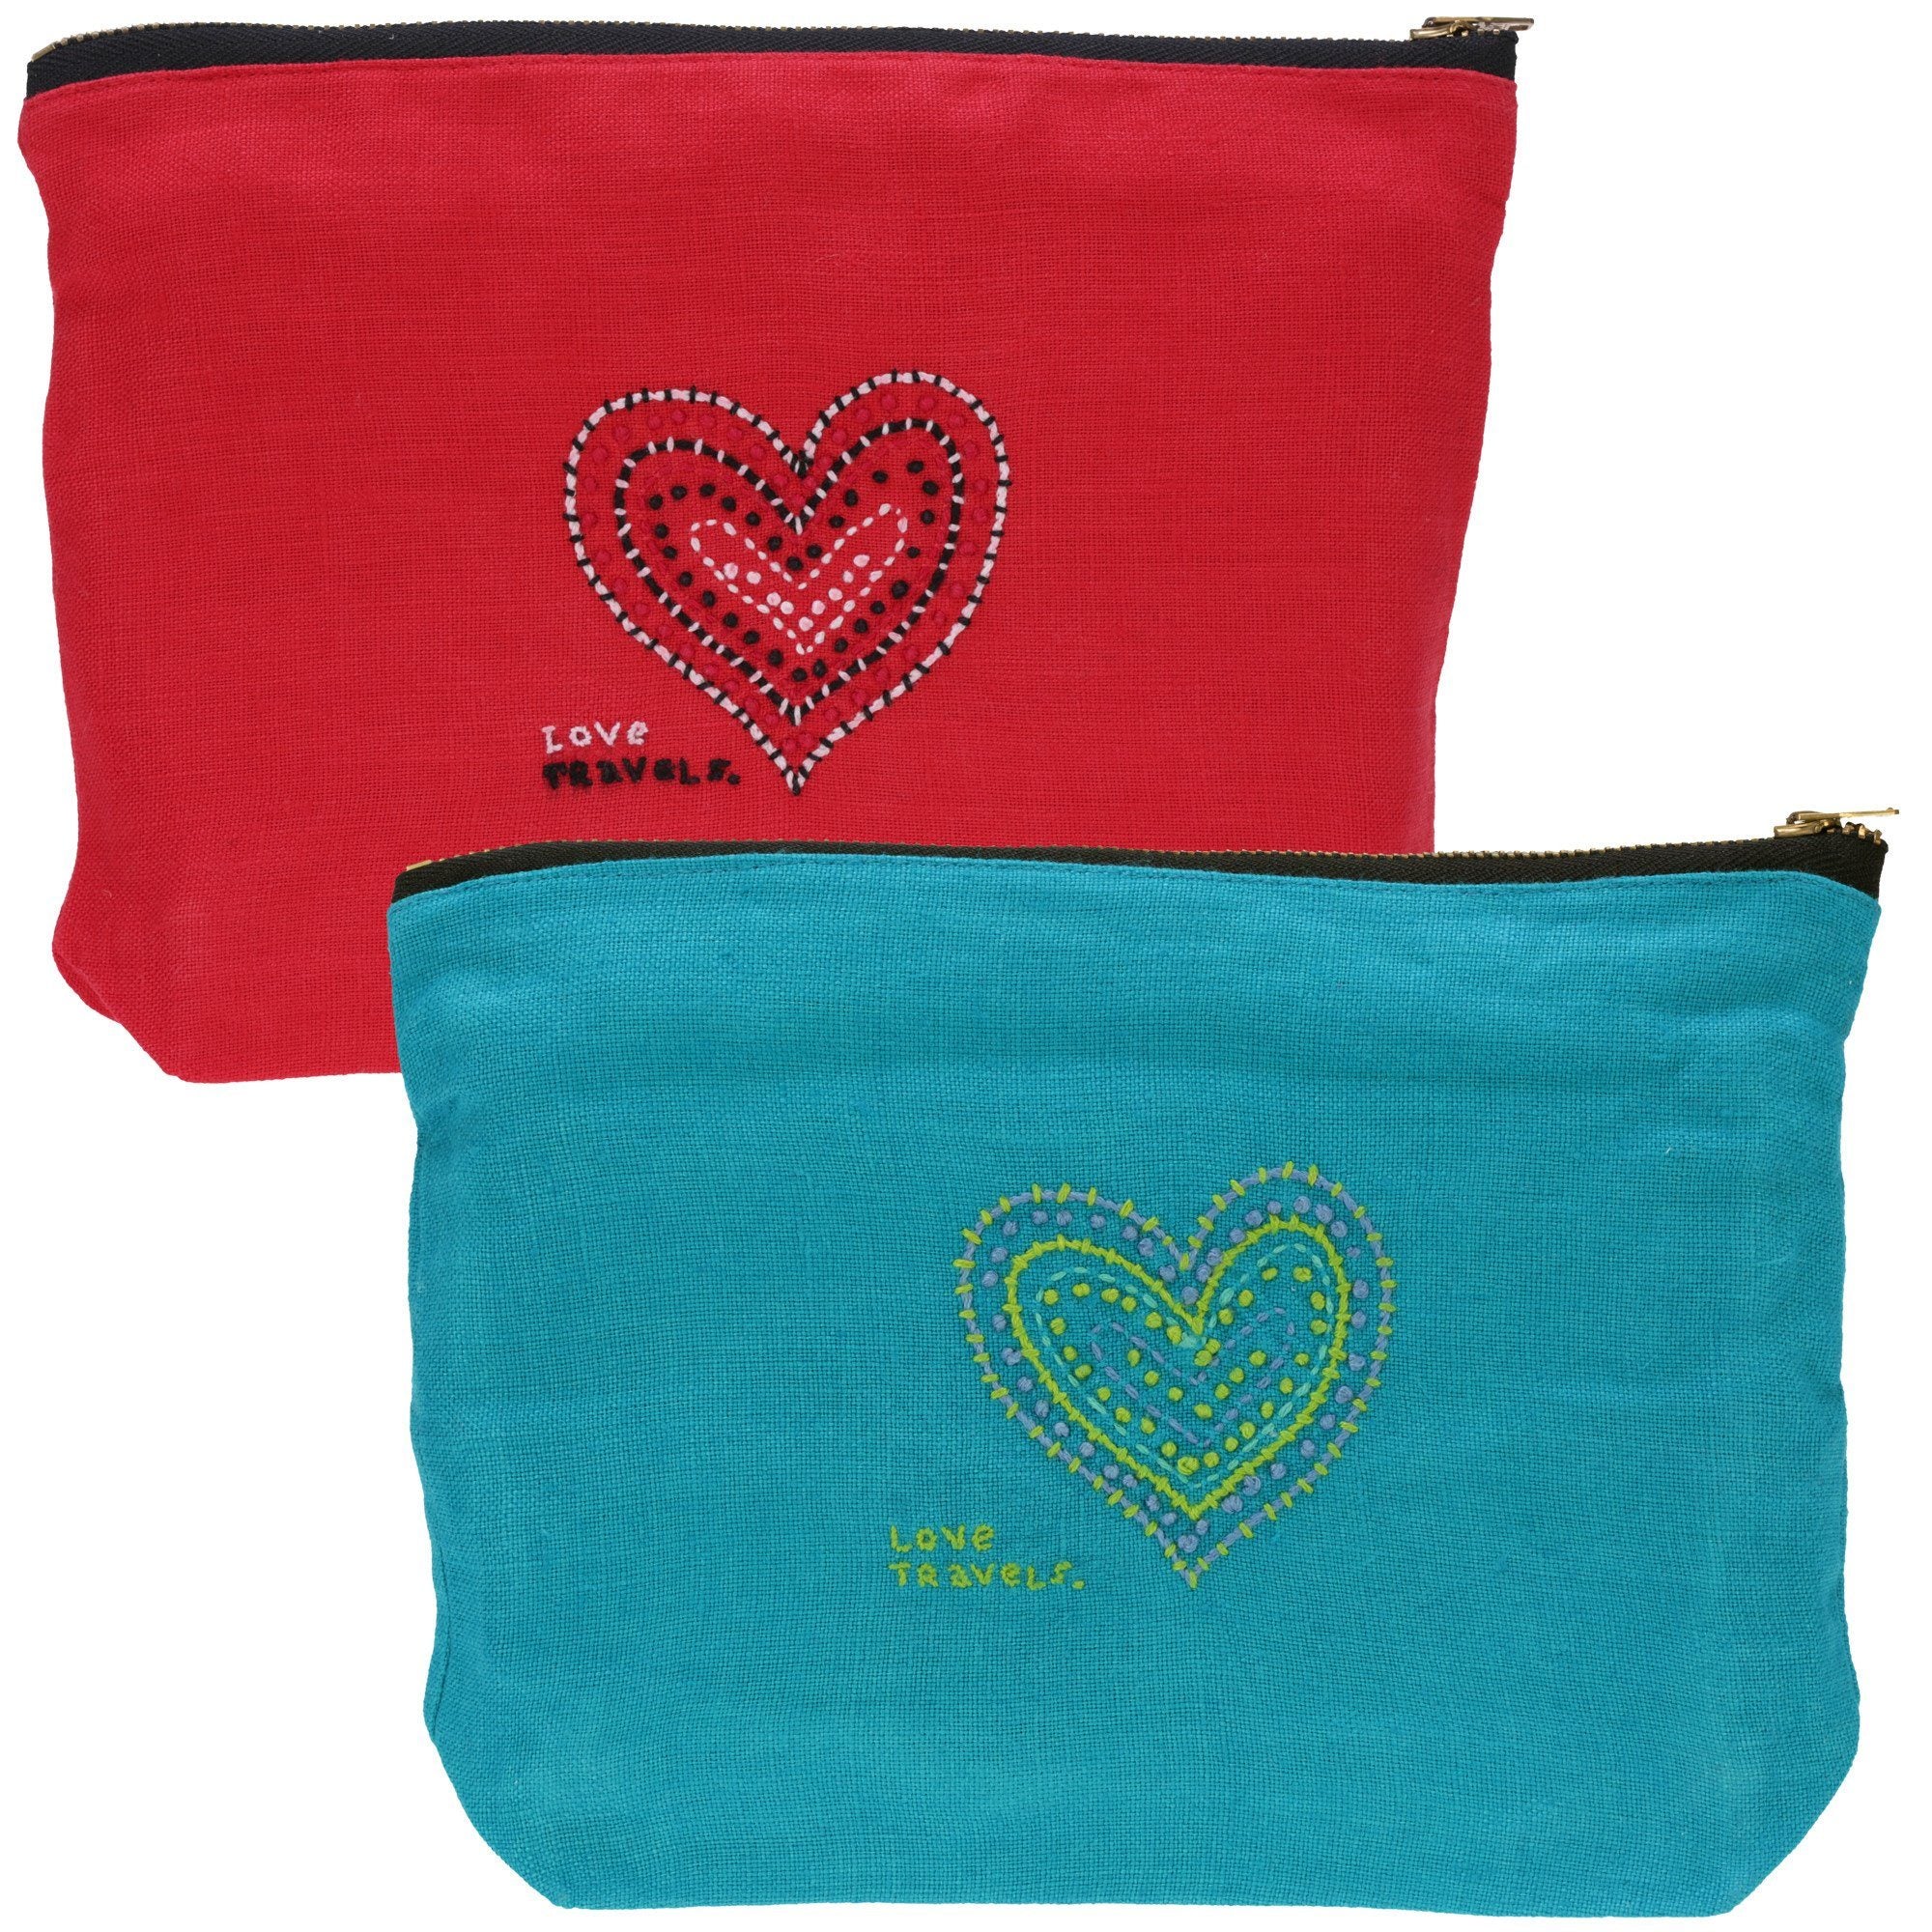 Love Travels Pouch - Red